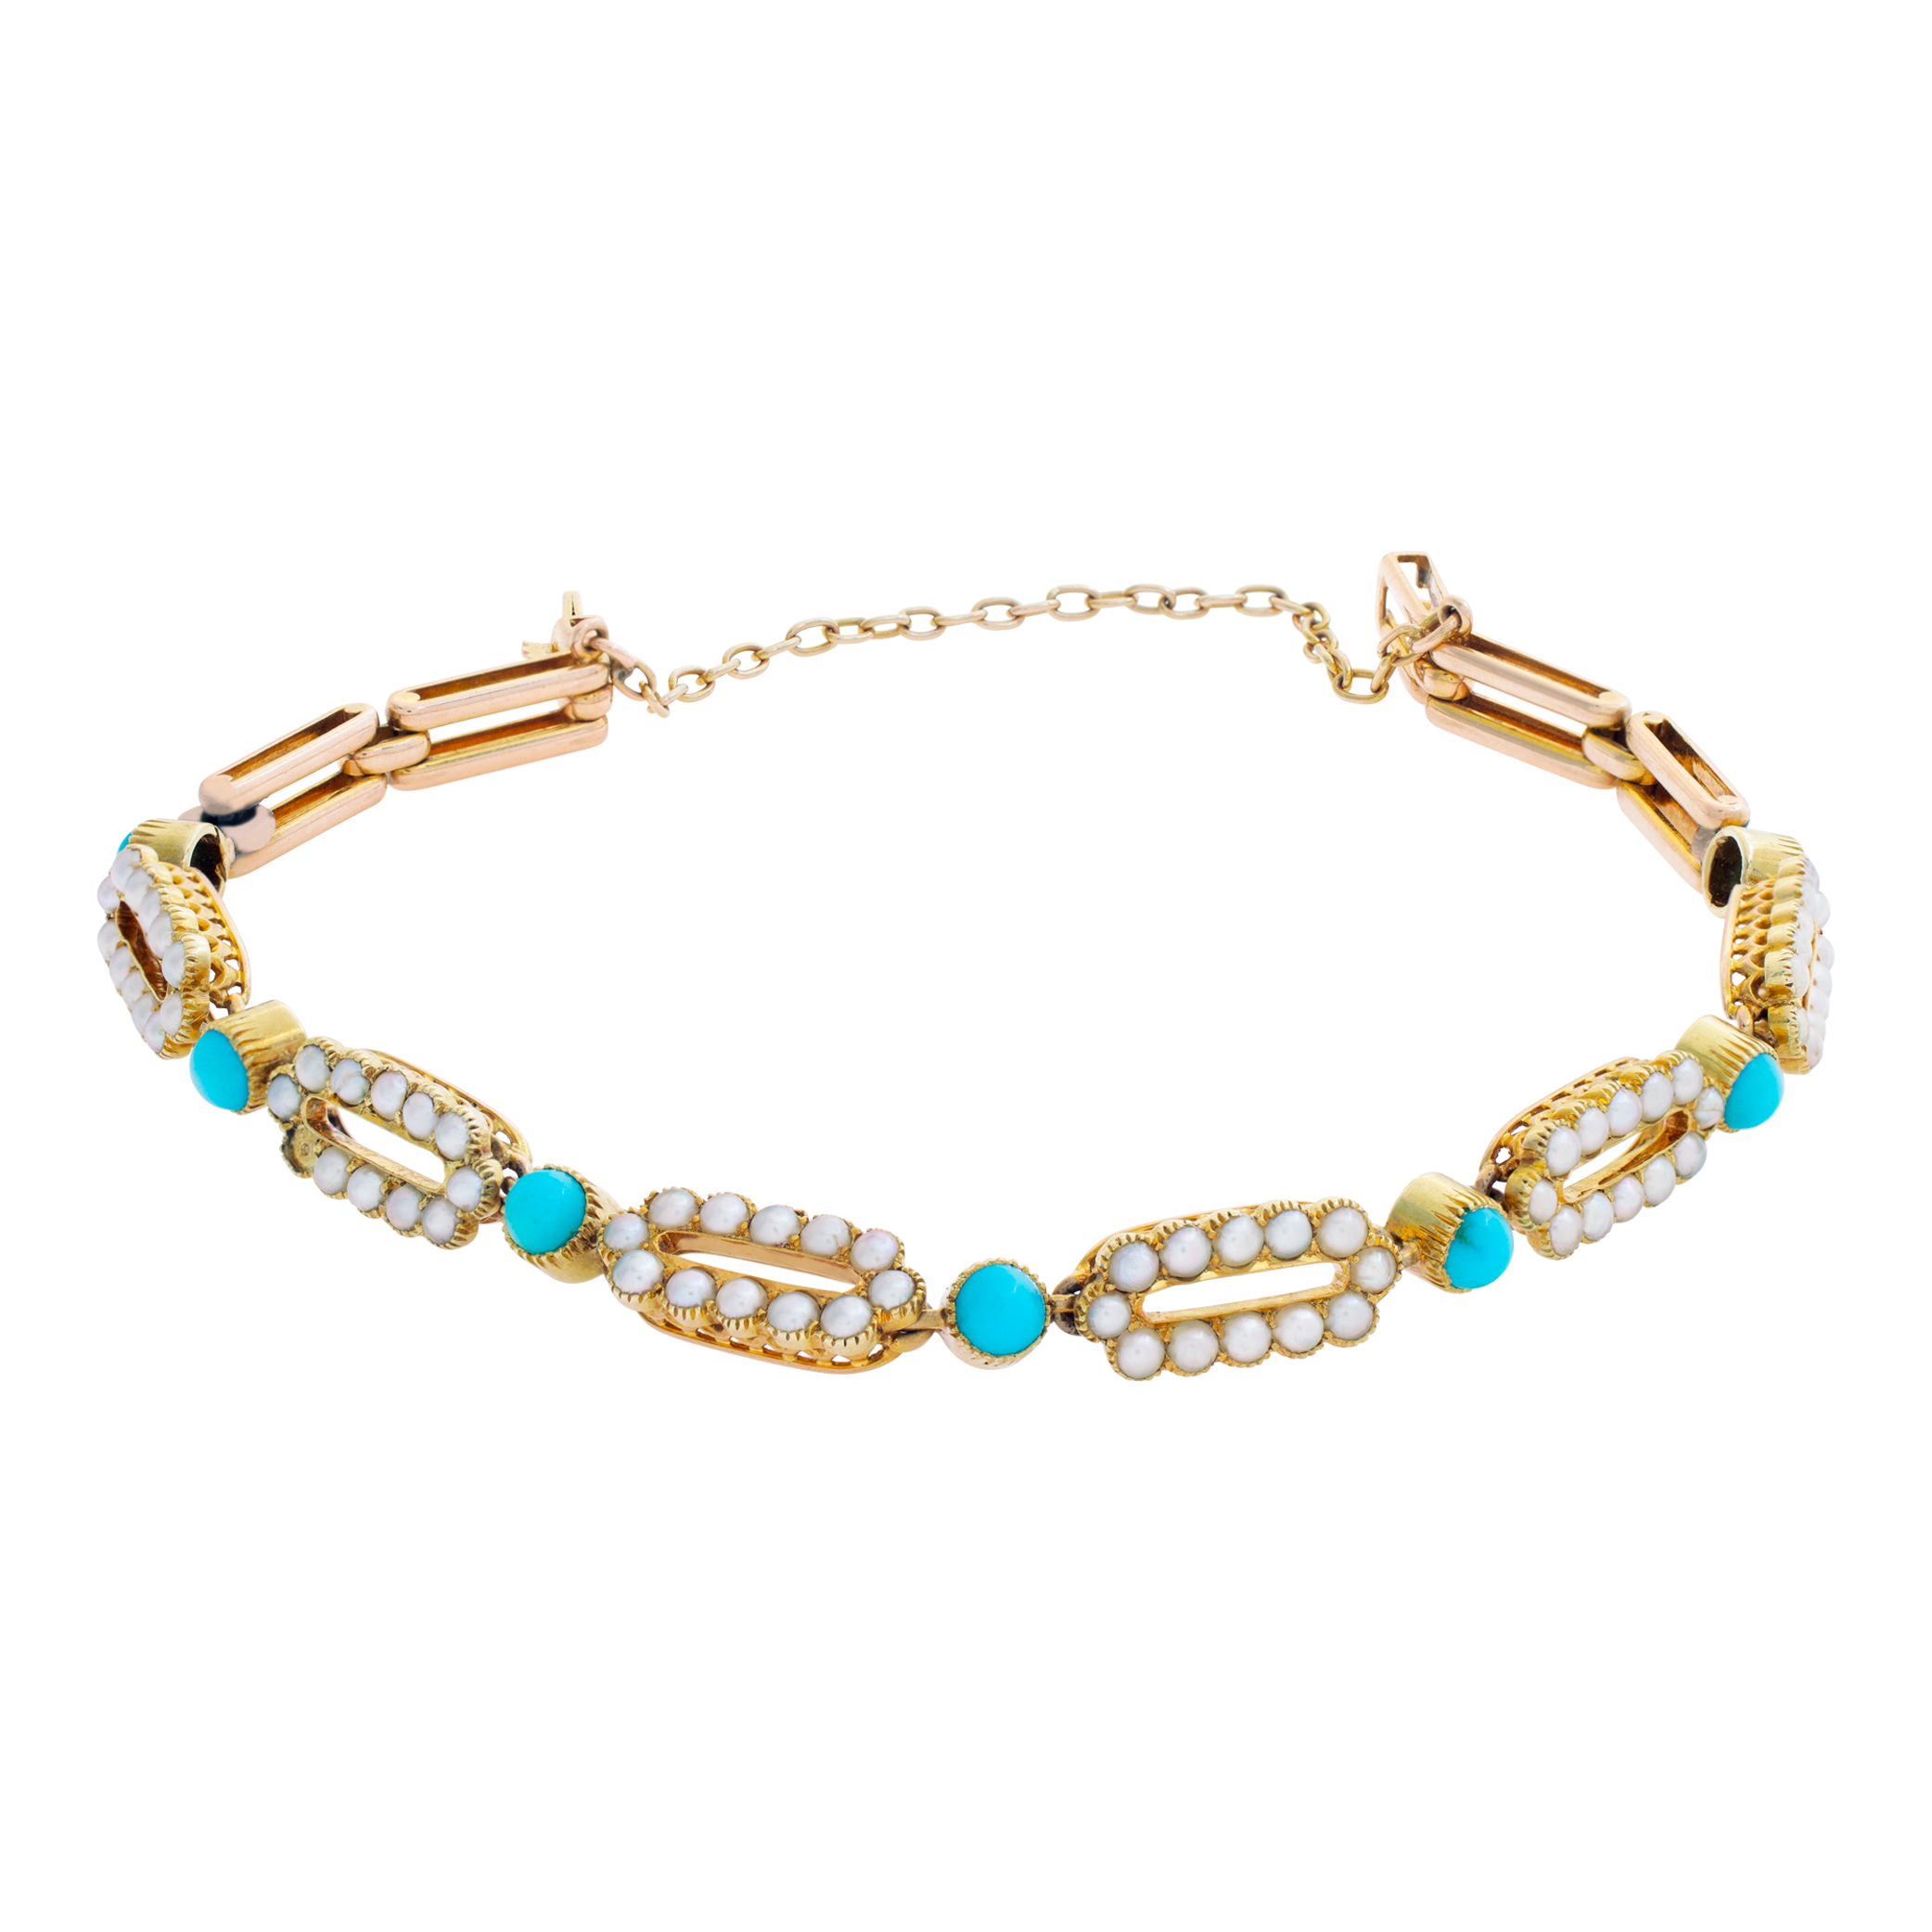 English Victorian era, circa 1880, antique oval and rectangular link bracelet with cabochon turquoise and seed pearls in 15 CT yellow gold